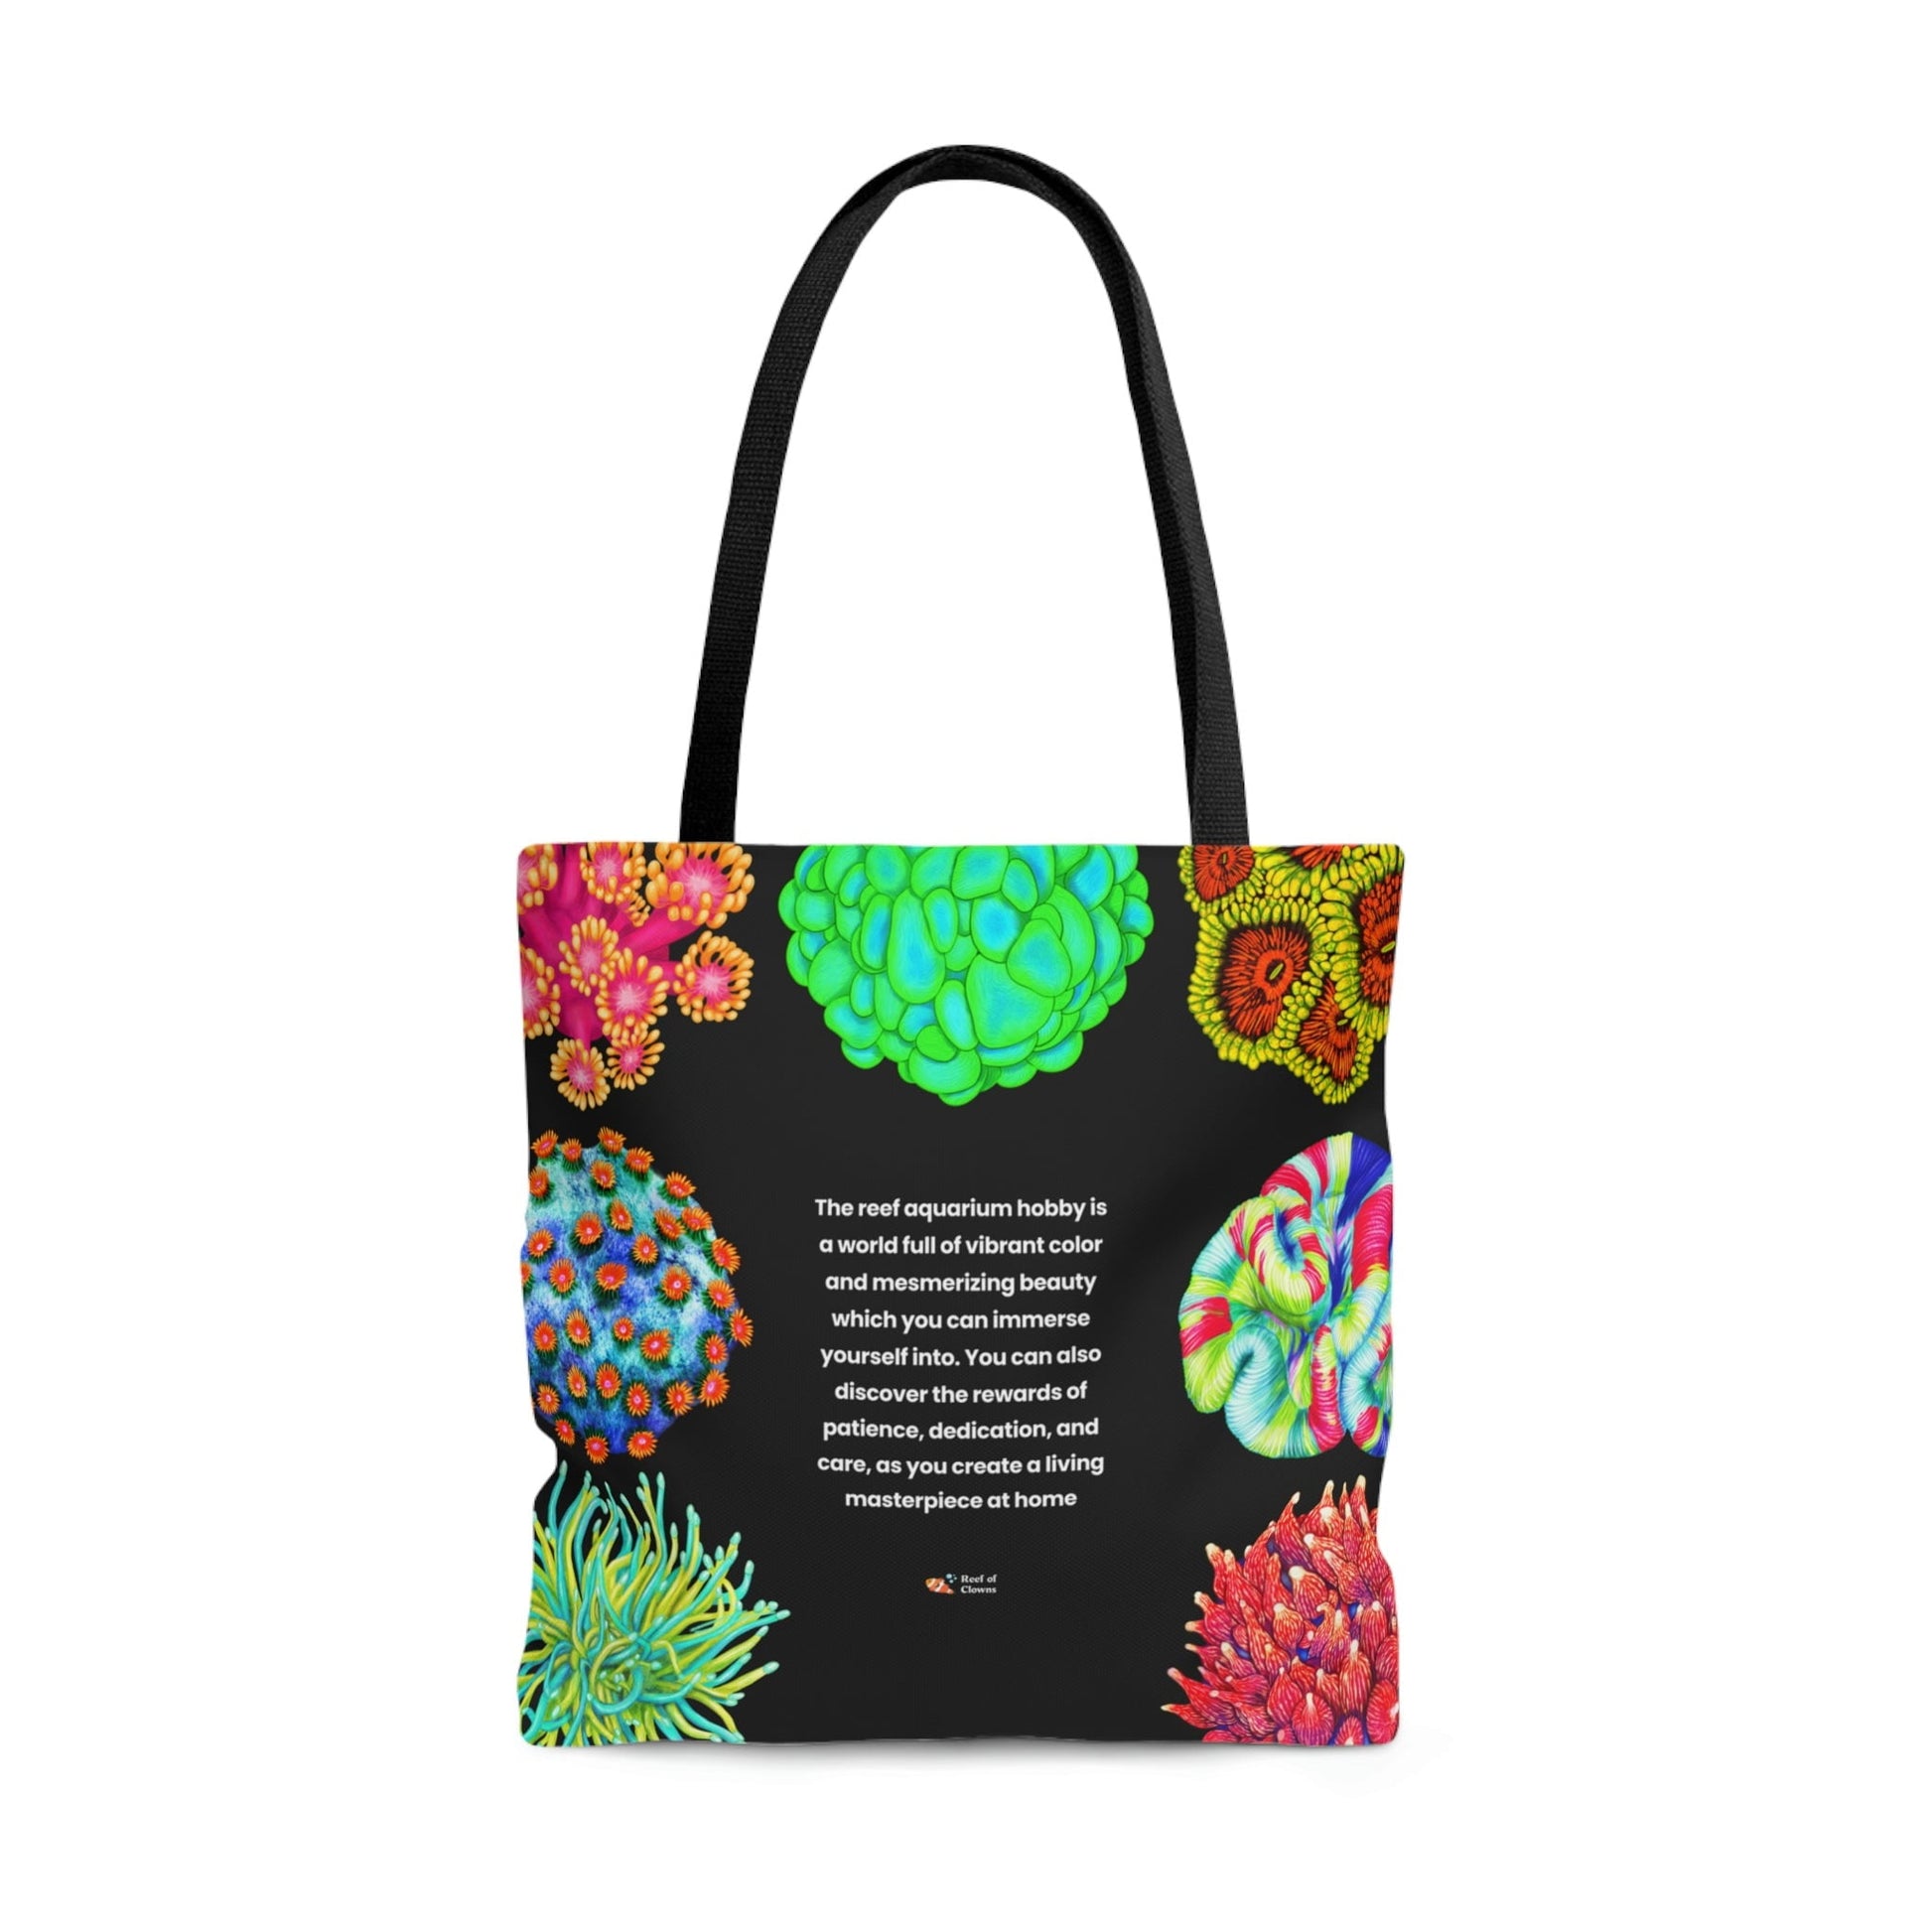 Inspirational Blurb About Reef Keeping Bag - Reef of Clowns